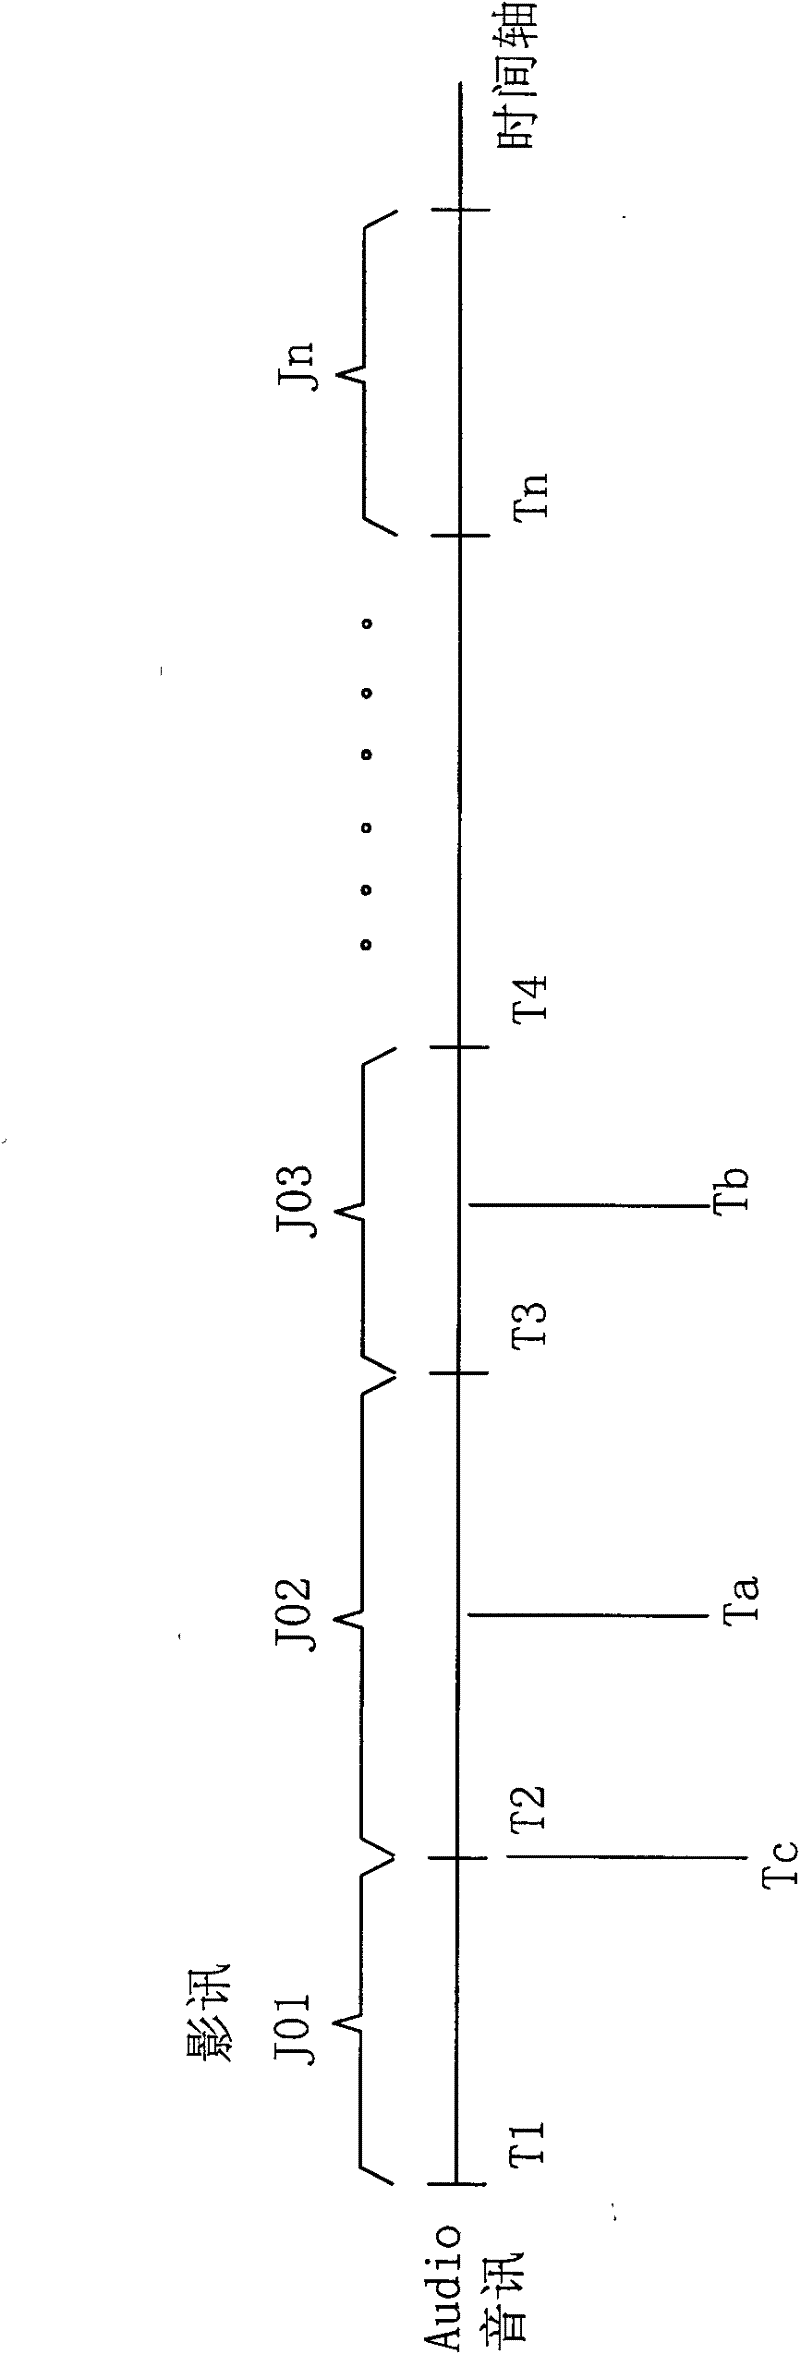 Method of processing audio-video data in an E-book reader